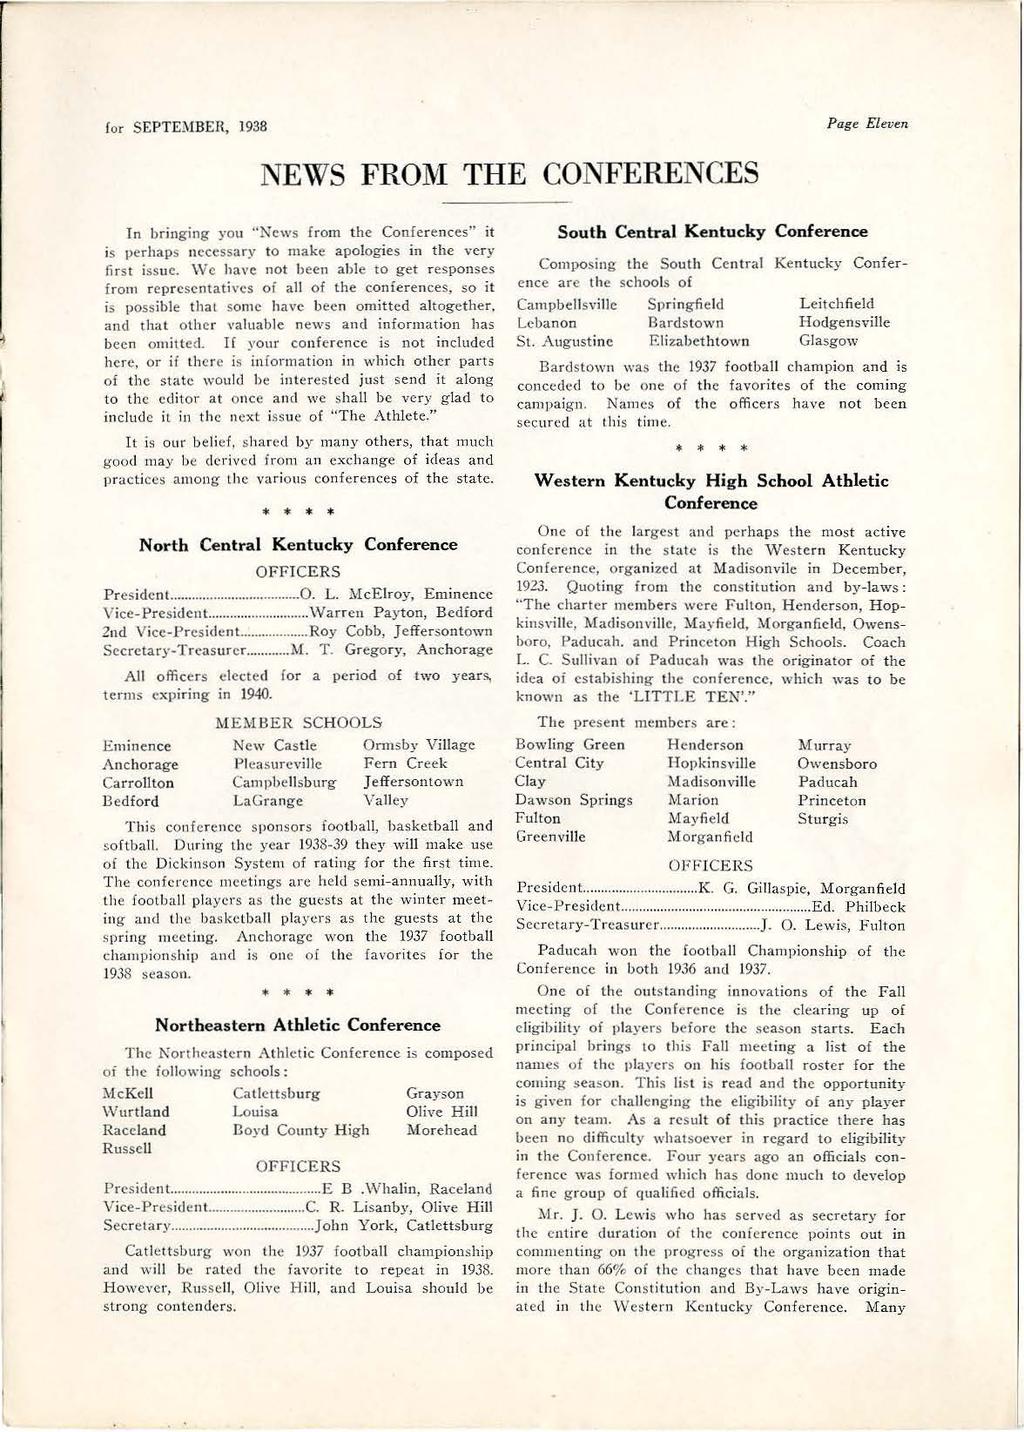 for SEPTEMBER, 1938 Page Eleven NEWS FROM THE CONFERENCES n brngng you "News from the Conferences" t s perhap~ necessary to make apologes n the very frst ssue.